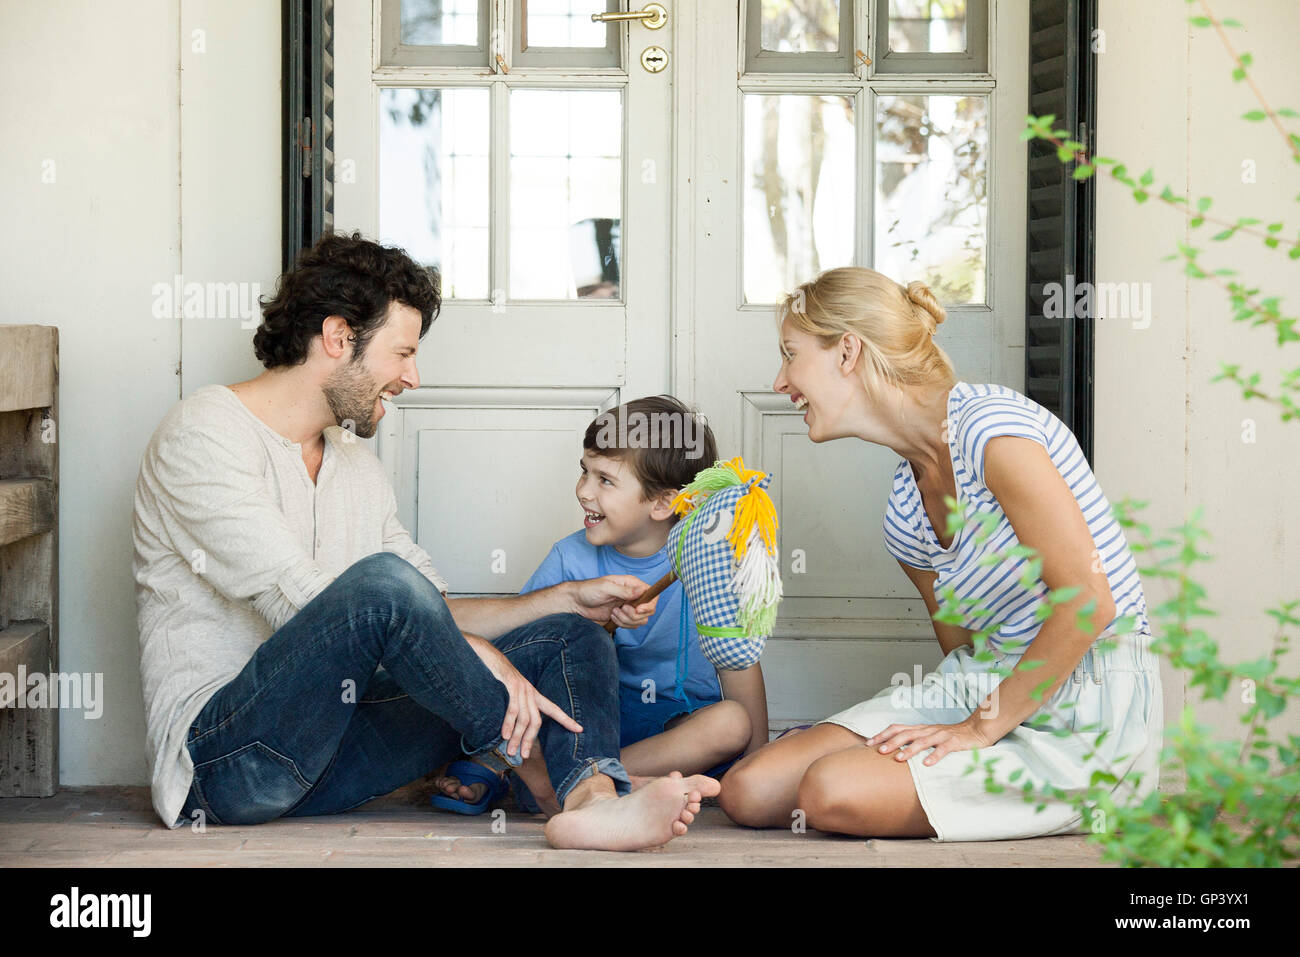 Family with one child having lighthearted time together outdoors Stock Photo